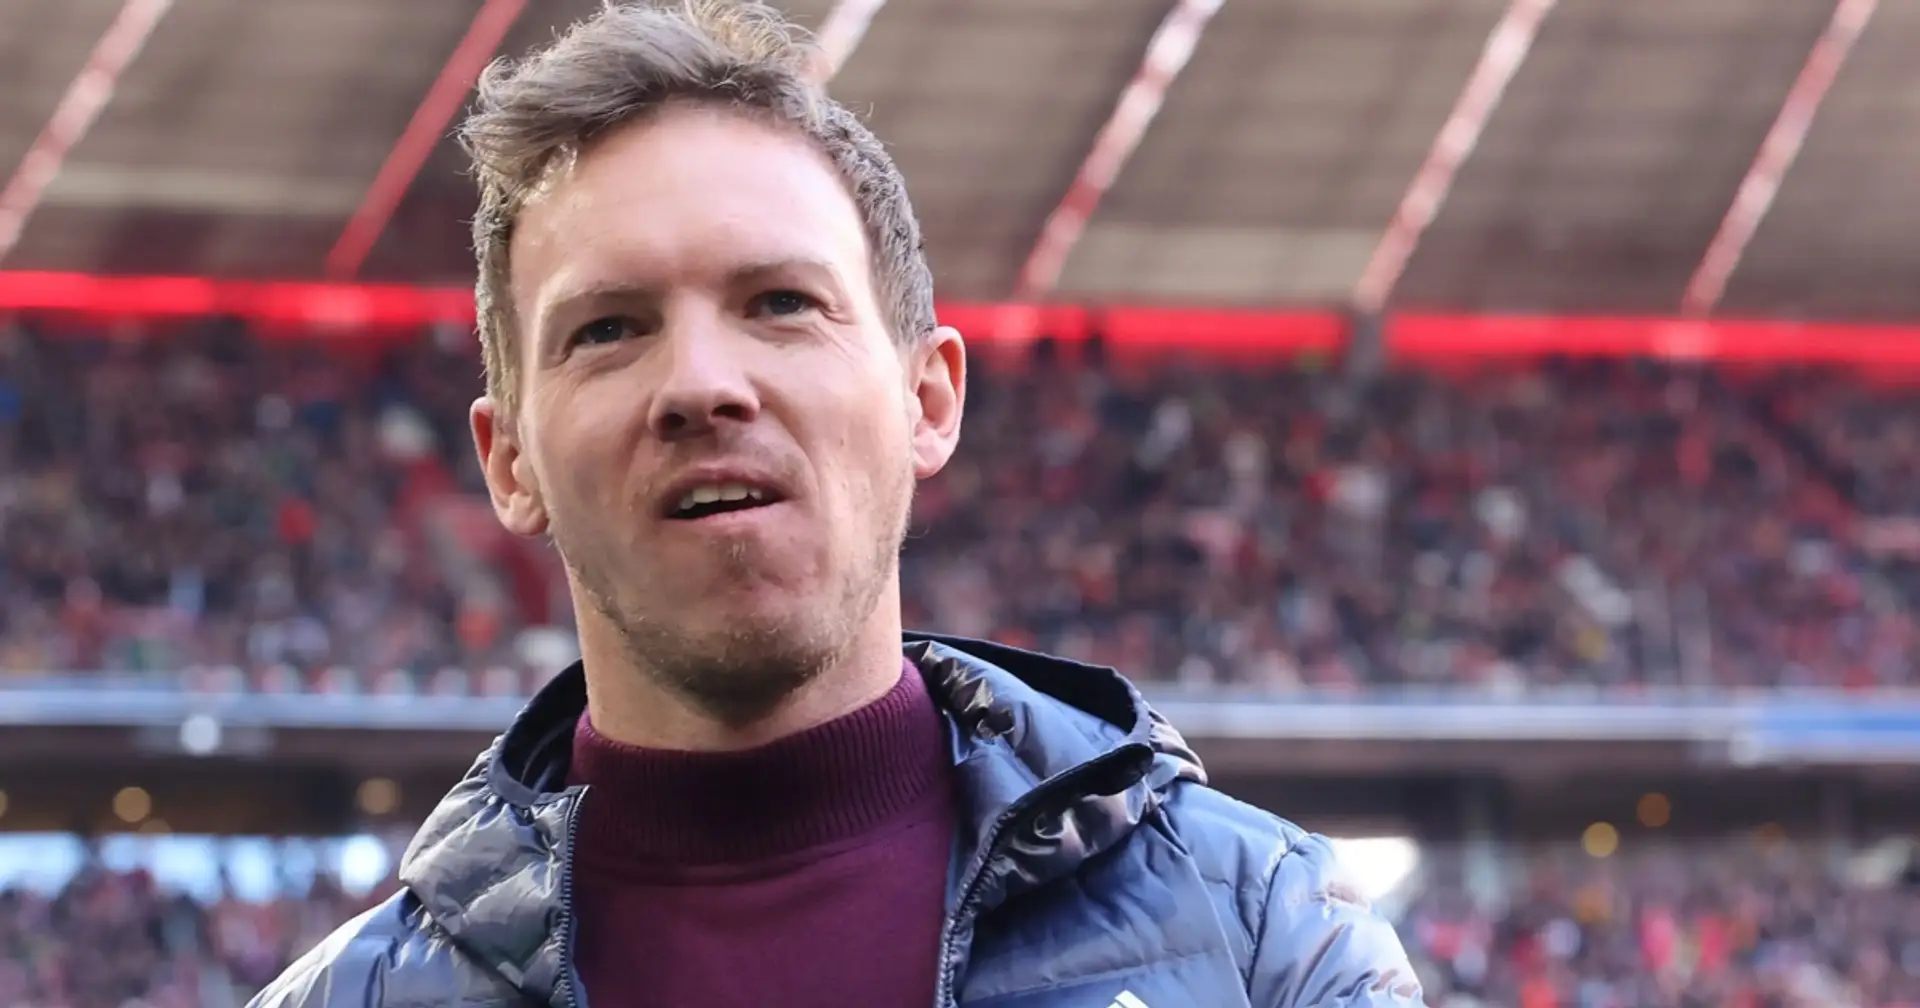 Key reason why Chelsea won't approach Nagelsmann if they sack Poch revealed